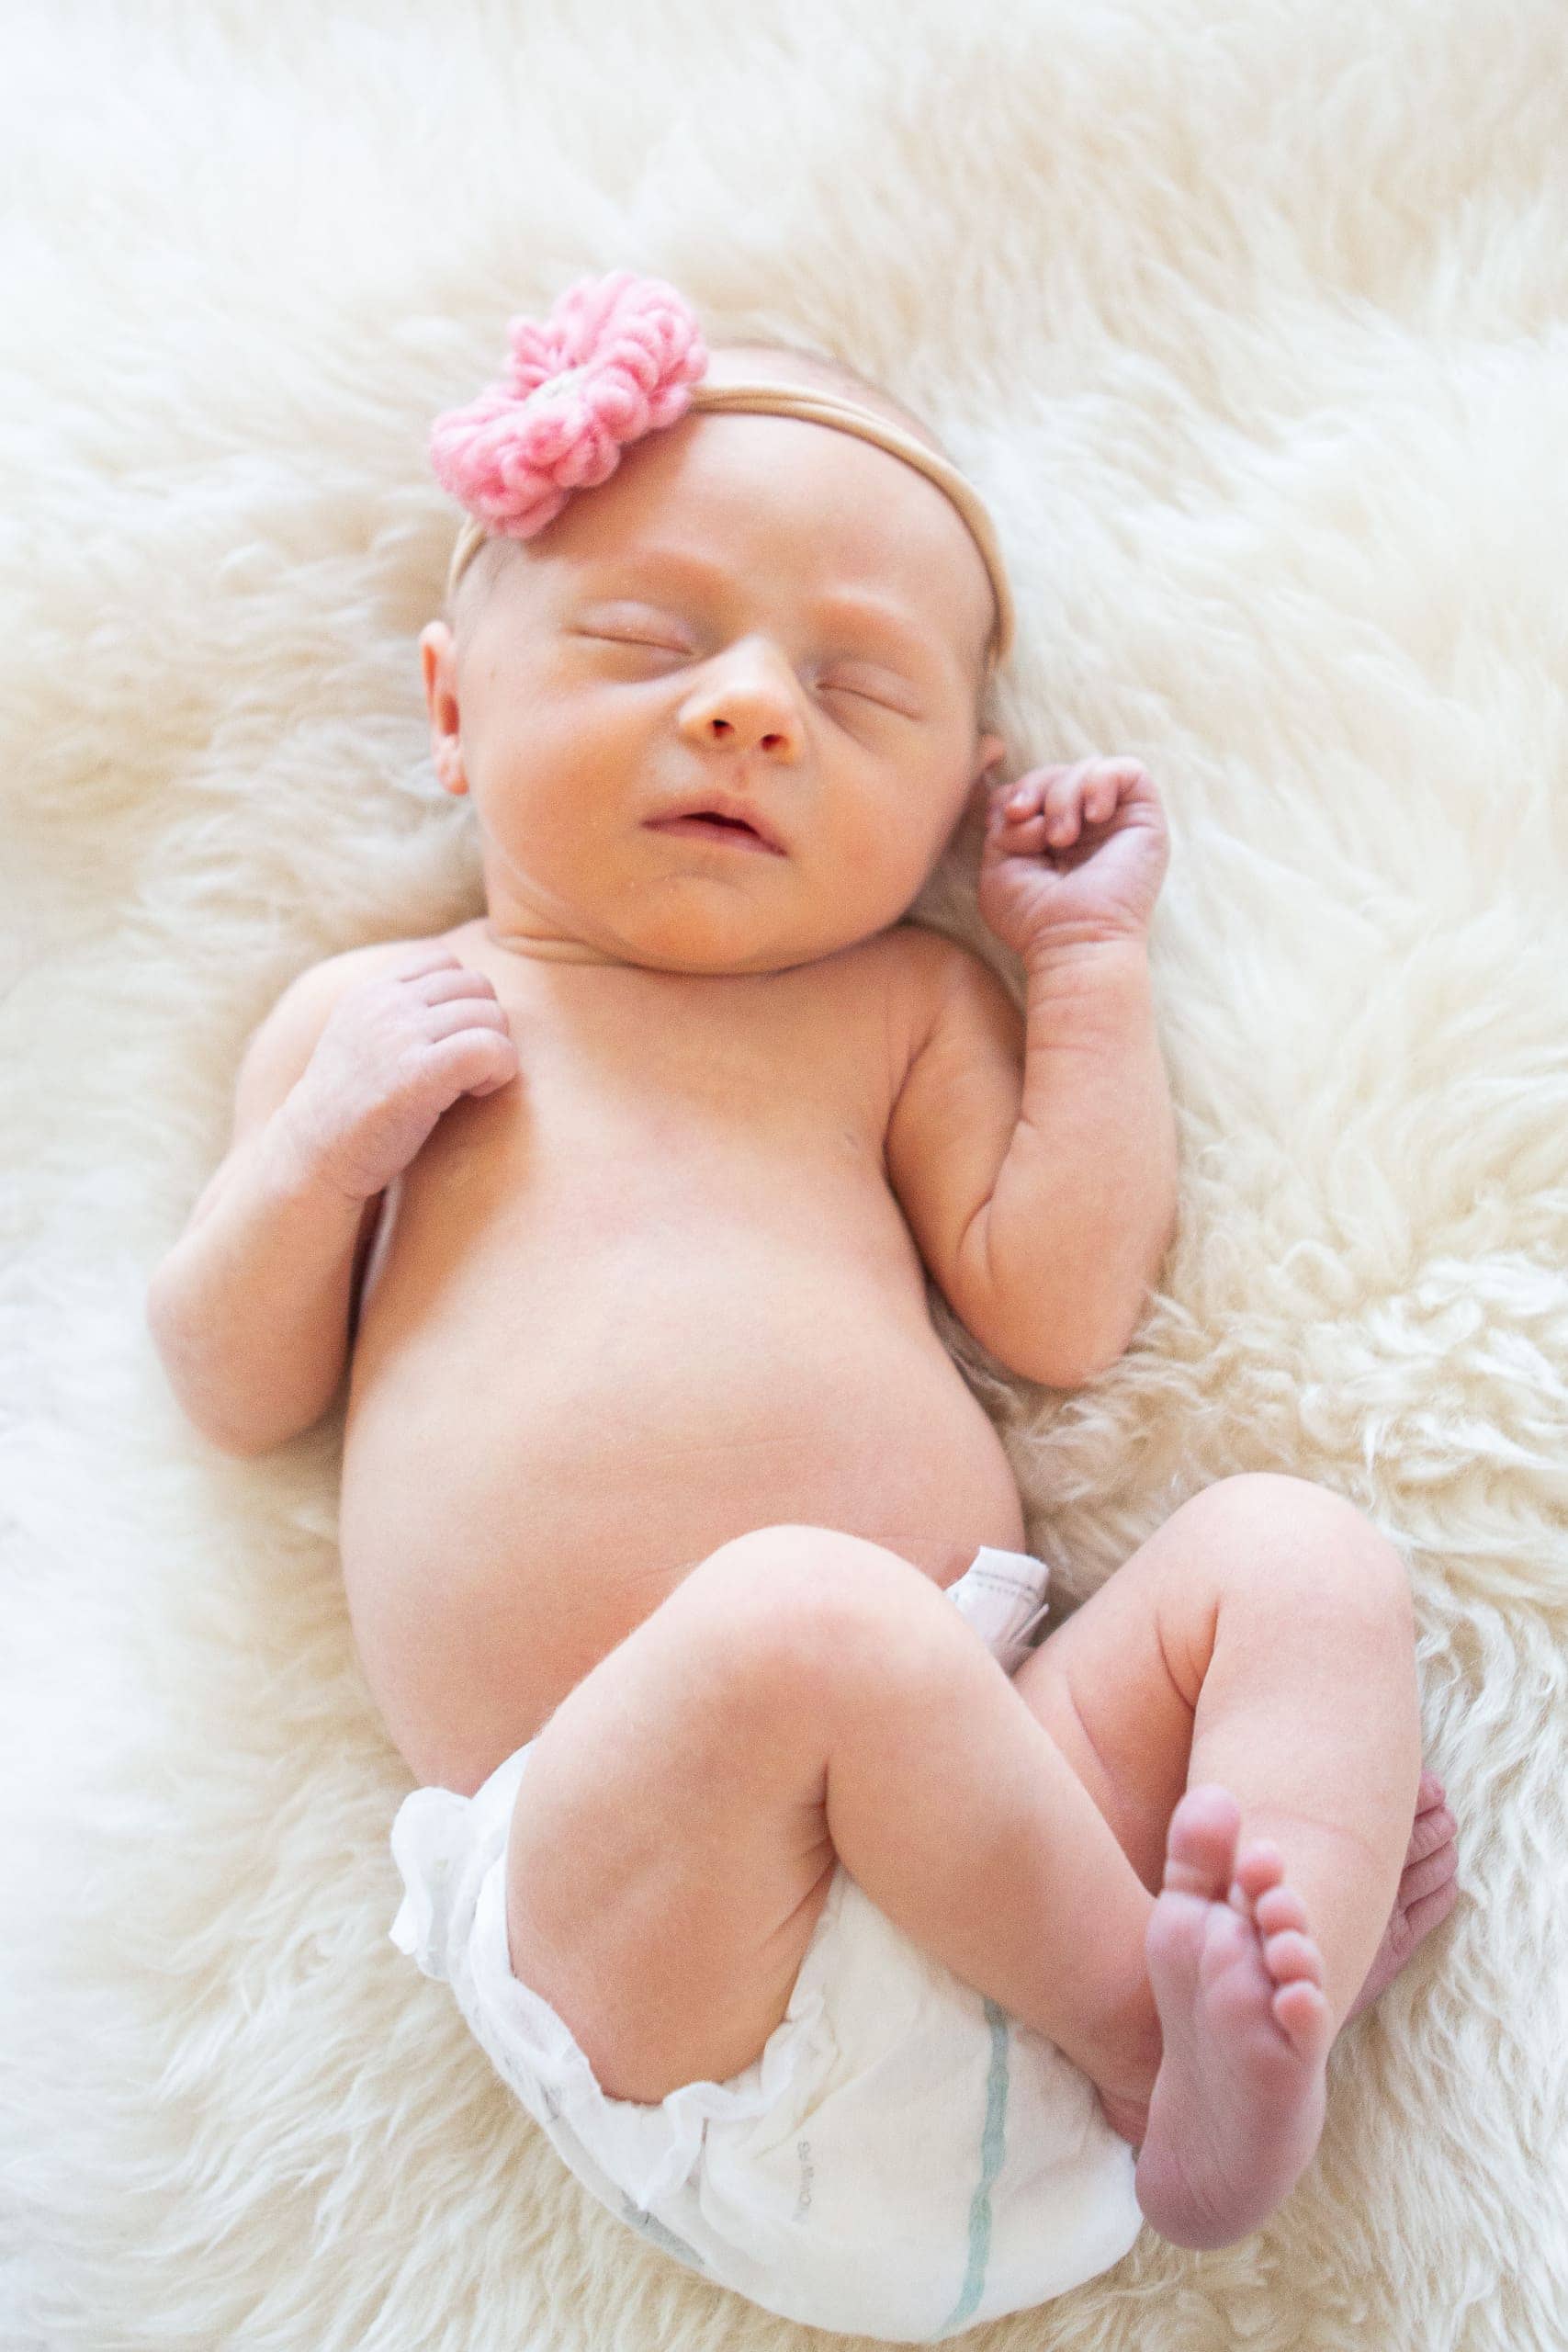 Newborn photos during my maternity leave